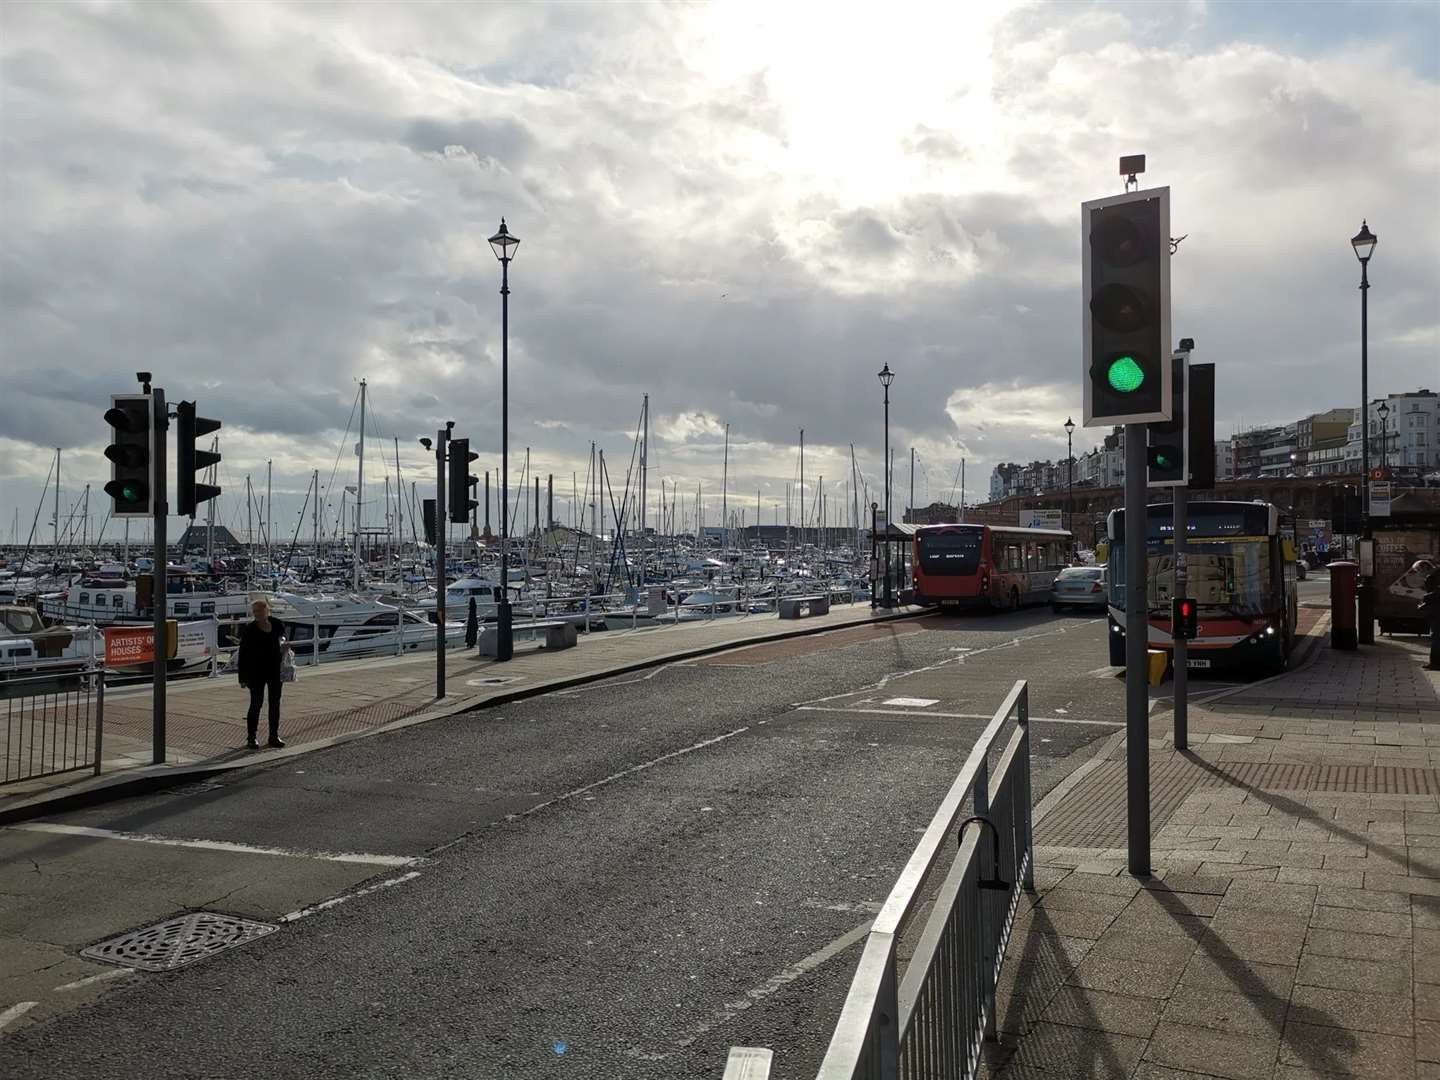 Police were called to Harbour Parade, Ramsgate in the early hours